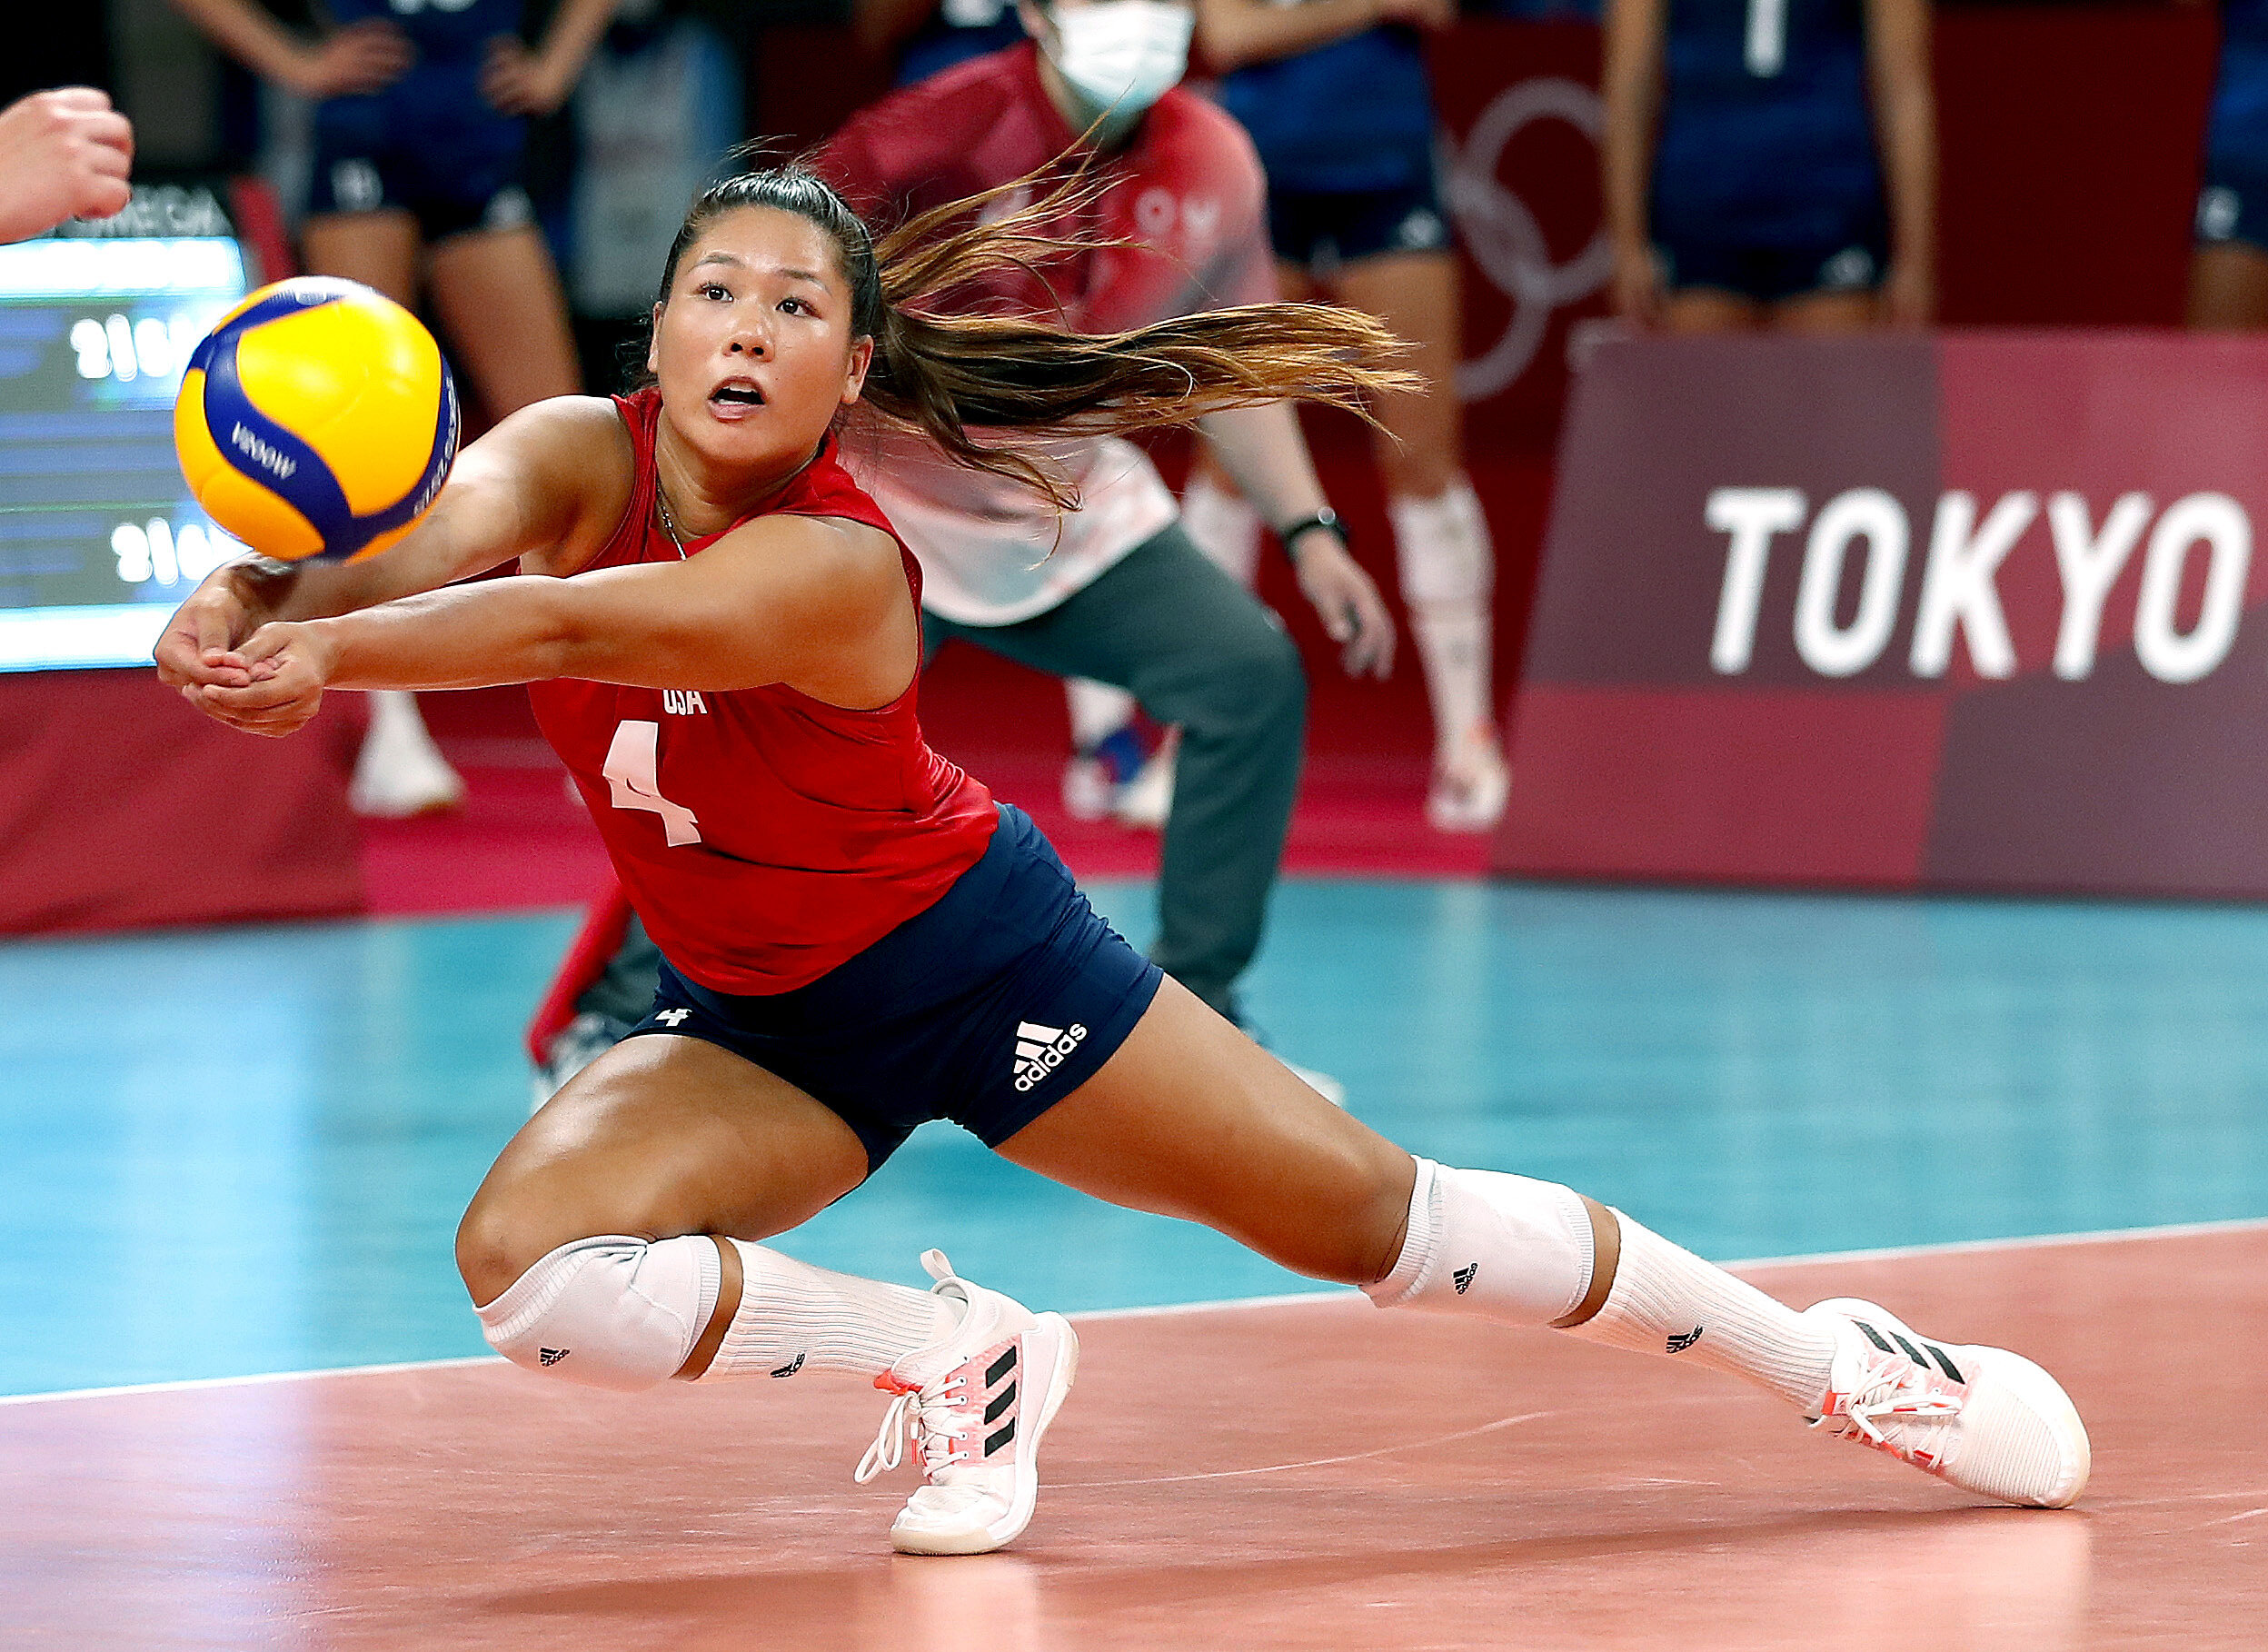  U.S. volleyball player Justine Wong Orantes returns a serve at the Tokyo Olympics. 